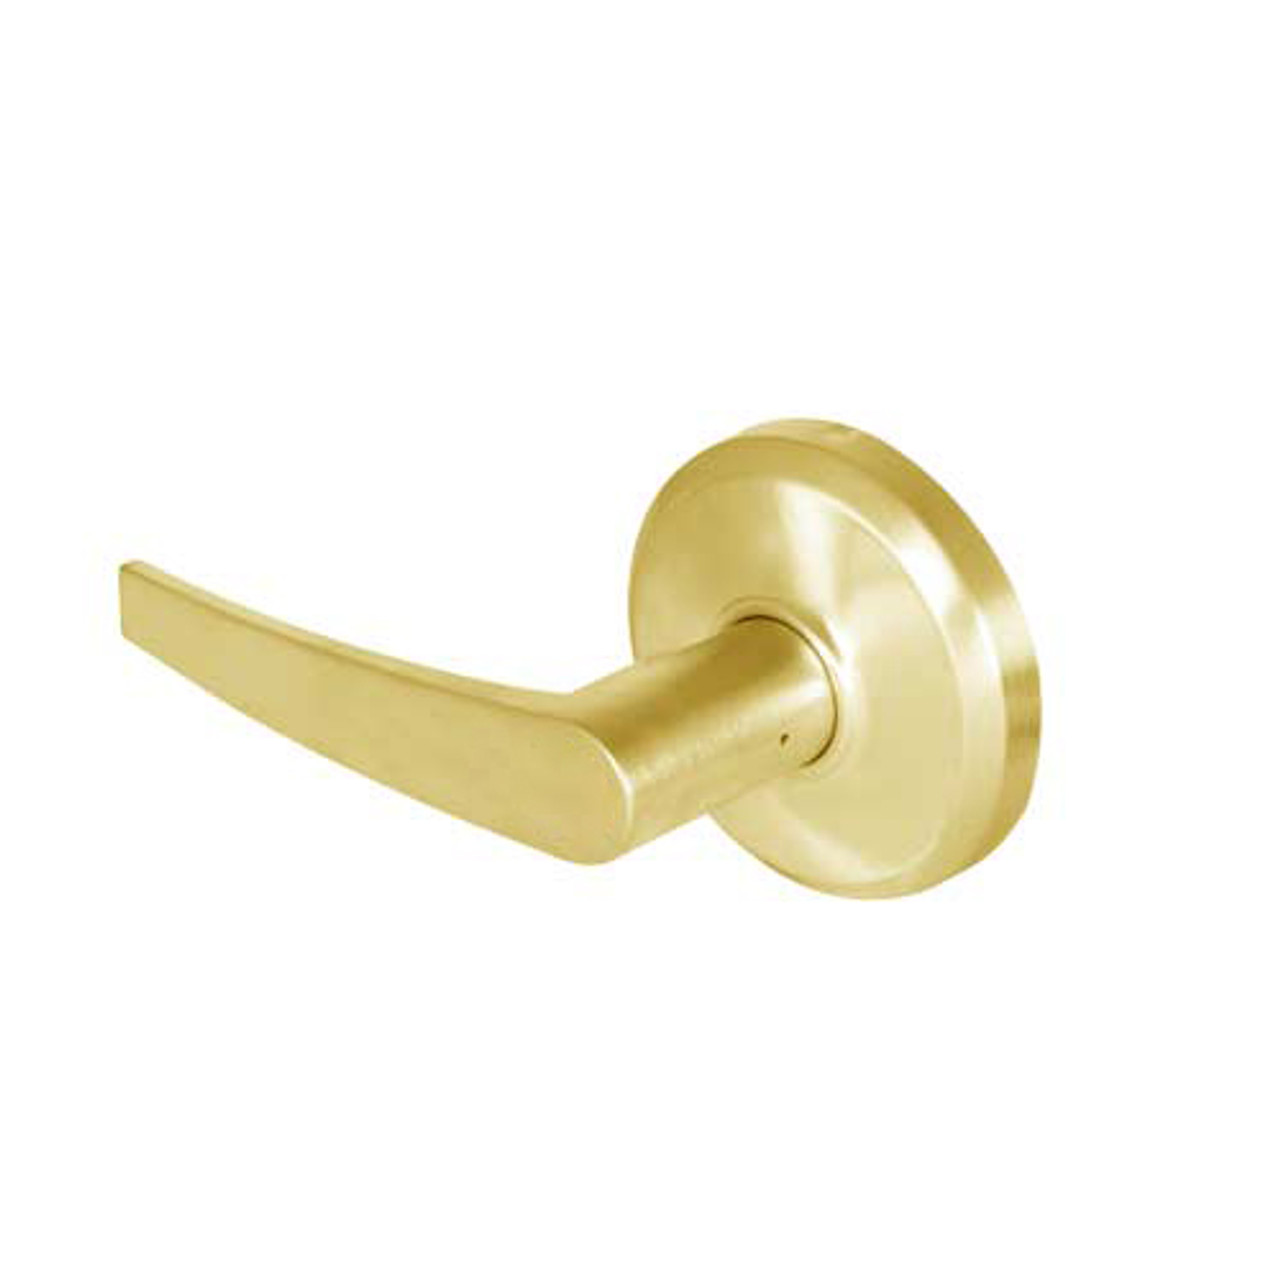 QCL240A605NS8NOS Stanley QCL200 Series Cylindrical Privacy Lock with Slate Lever in Bright Brass Finish